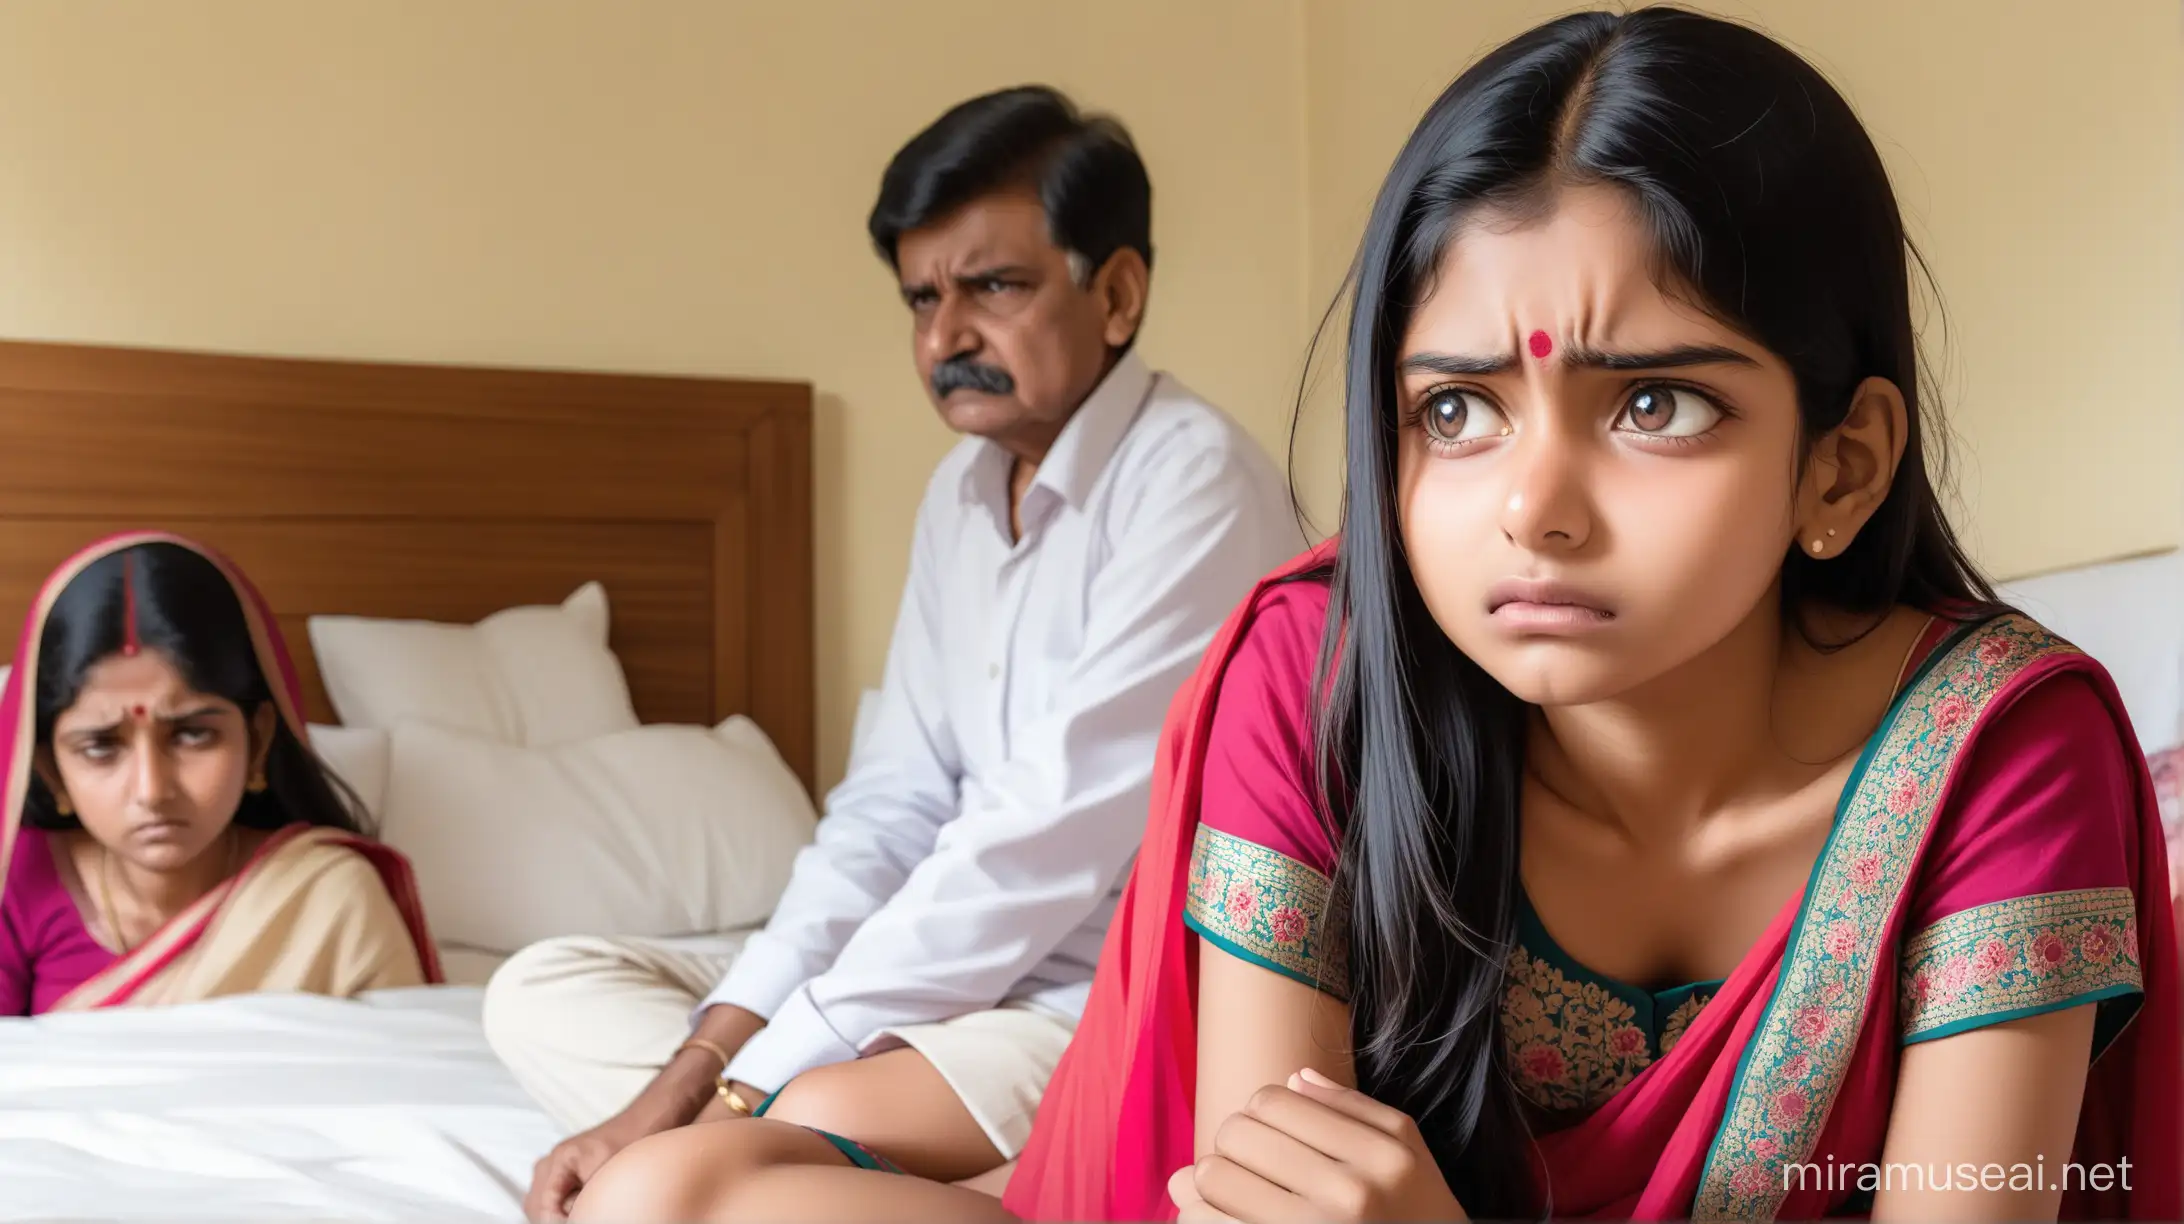 Teenage Indian Girl on Bed Displaying Distress with Caring Parents